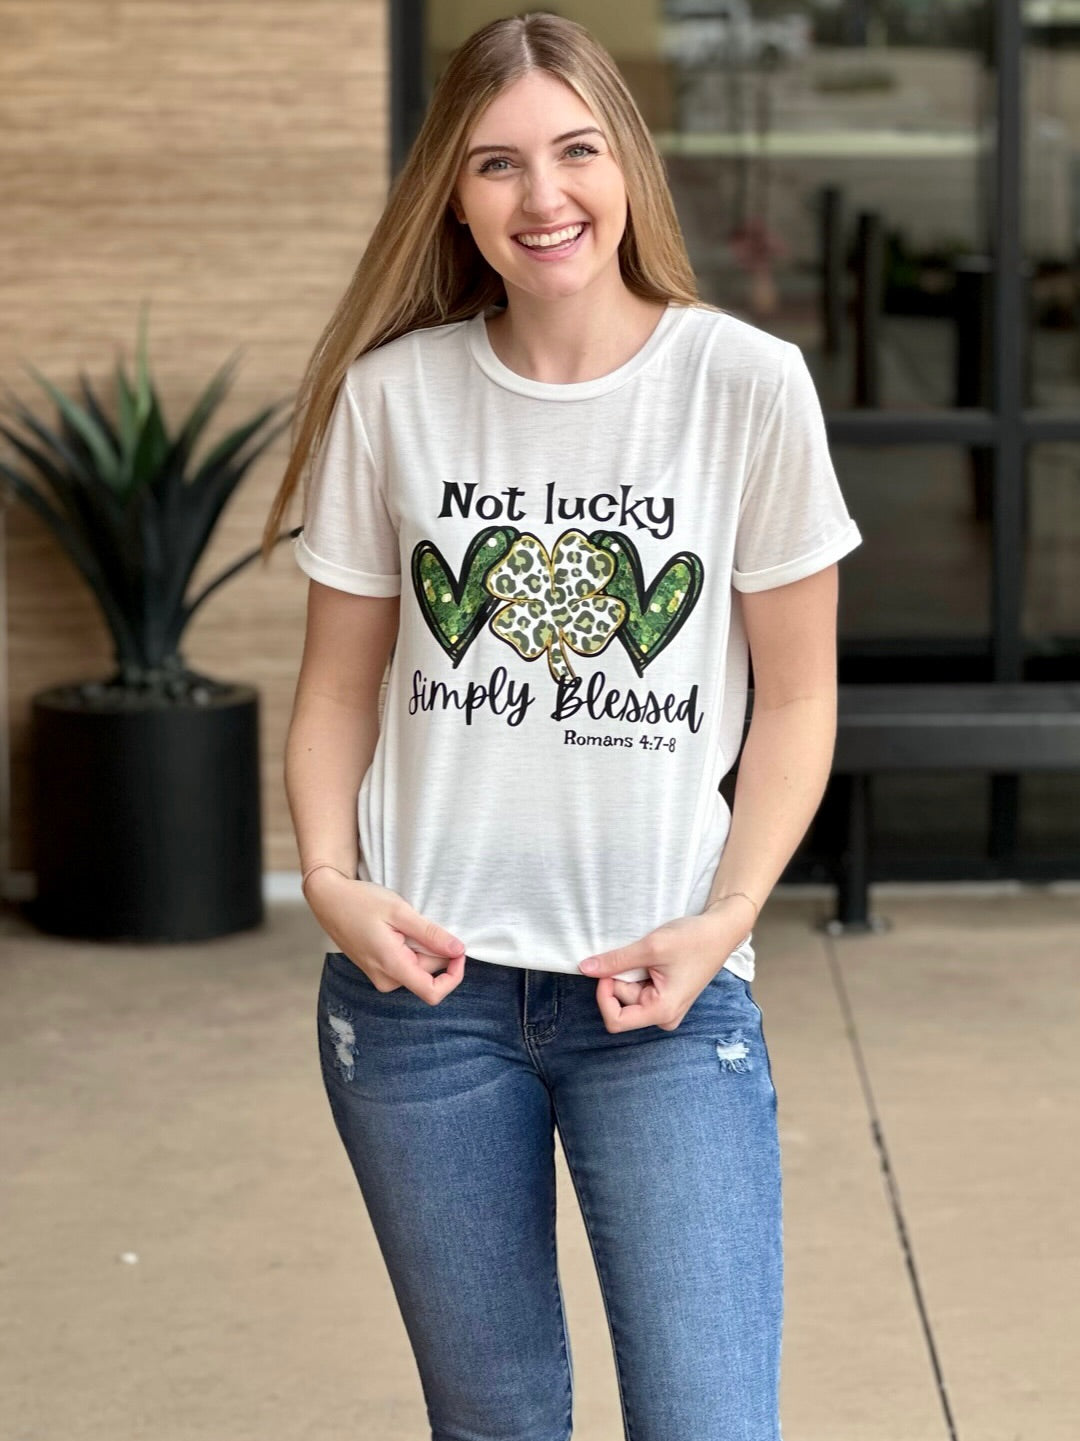 Lexi in simply blessed graphic tee smiling holding top